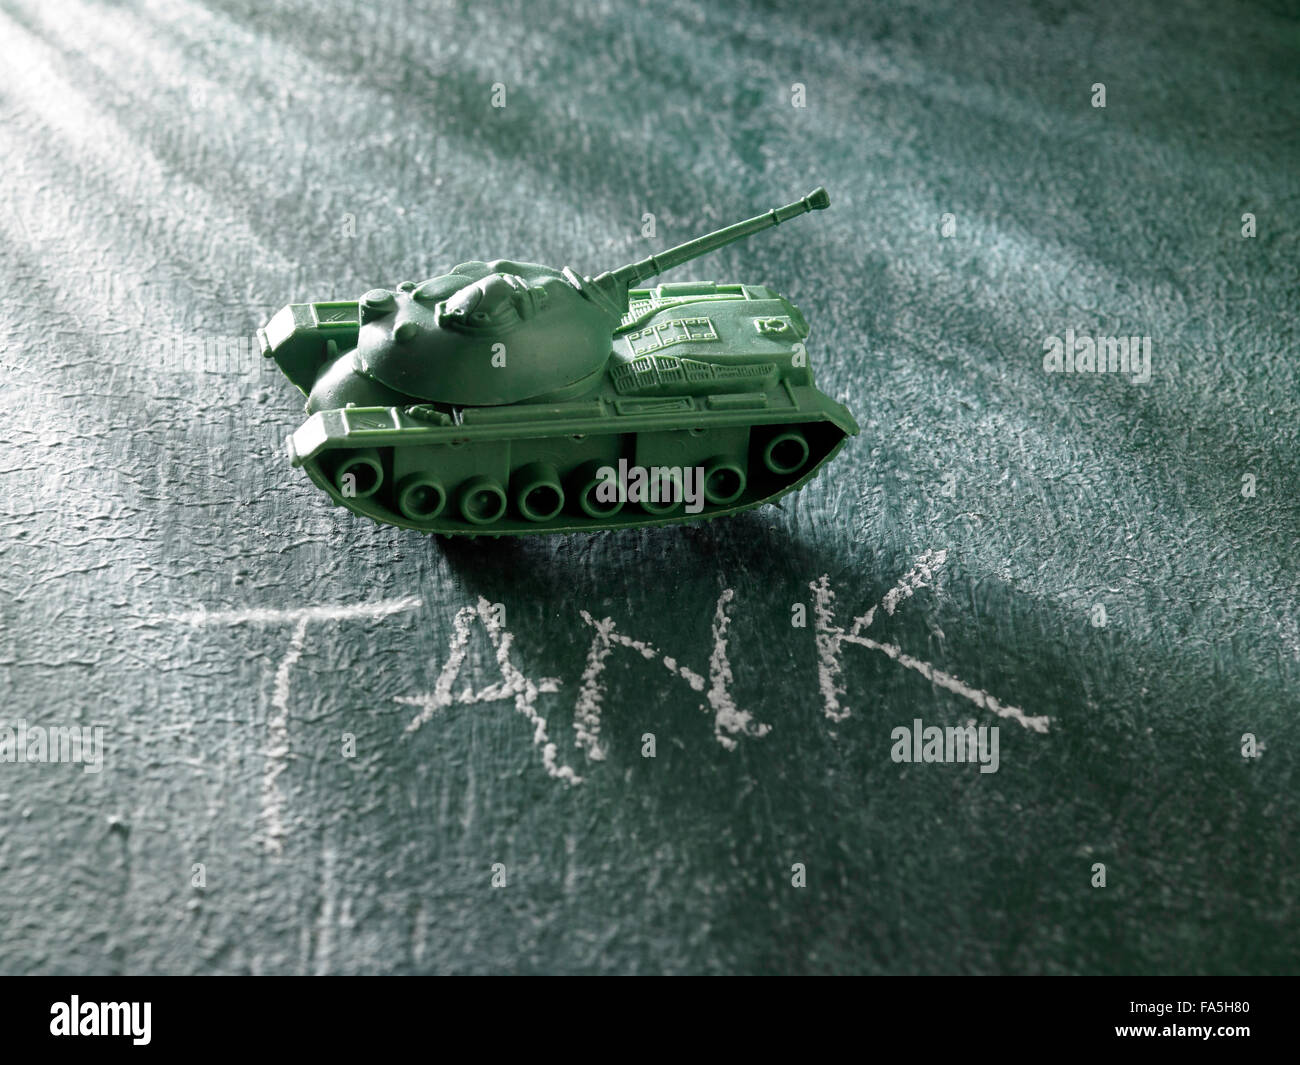 close up of toy military tank Stock Photo